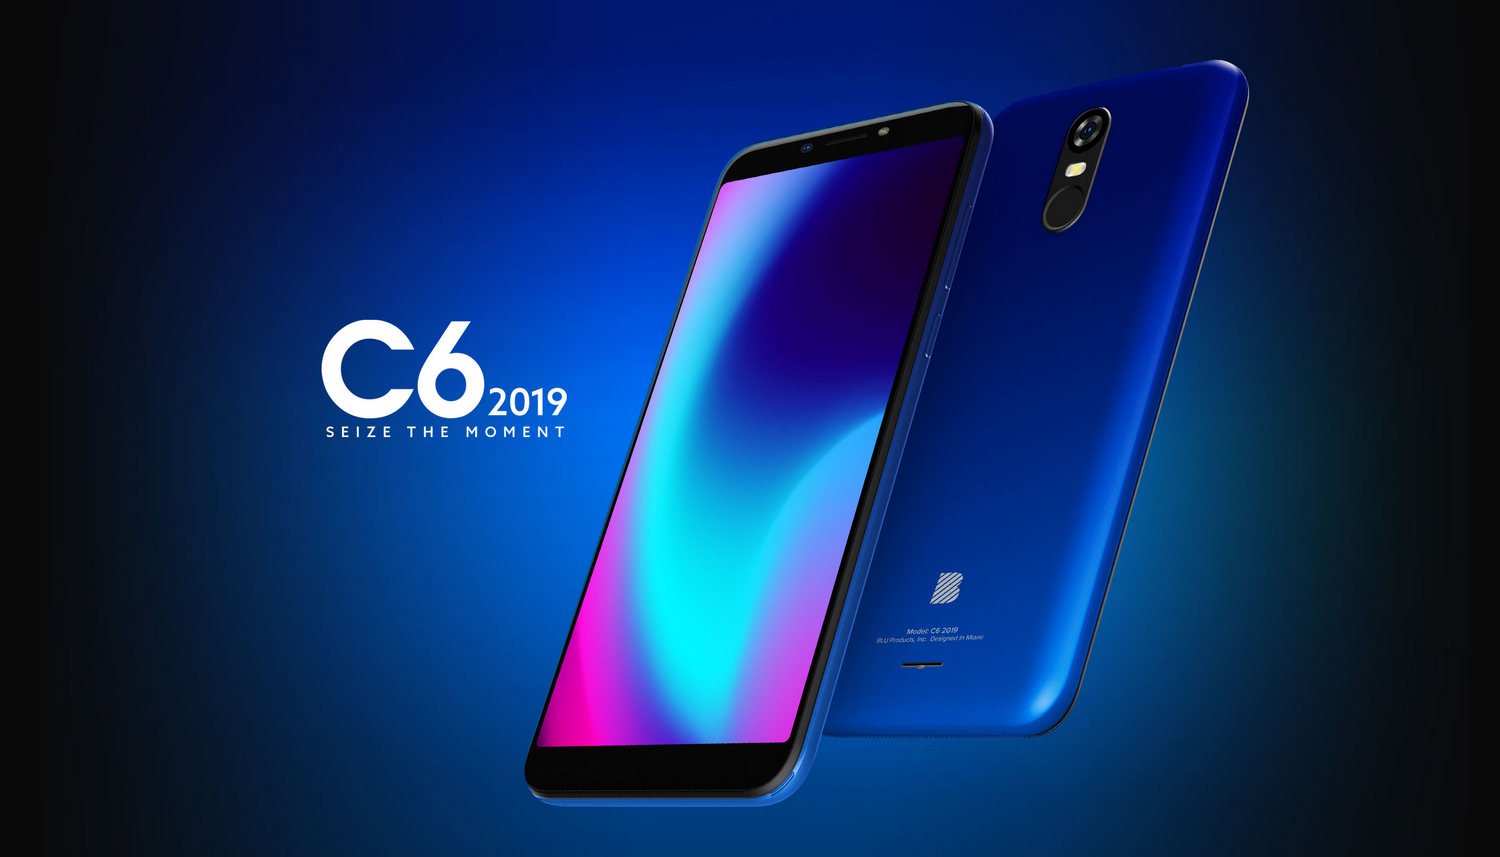 Uninstall Magisk and Unroot your BLU C6 2019